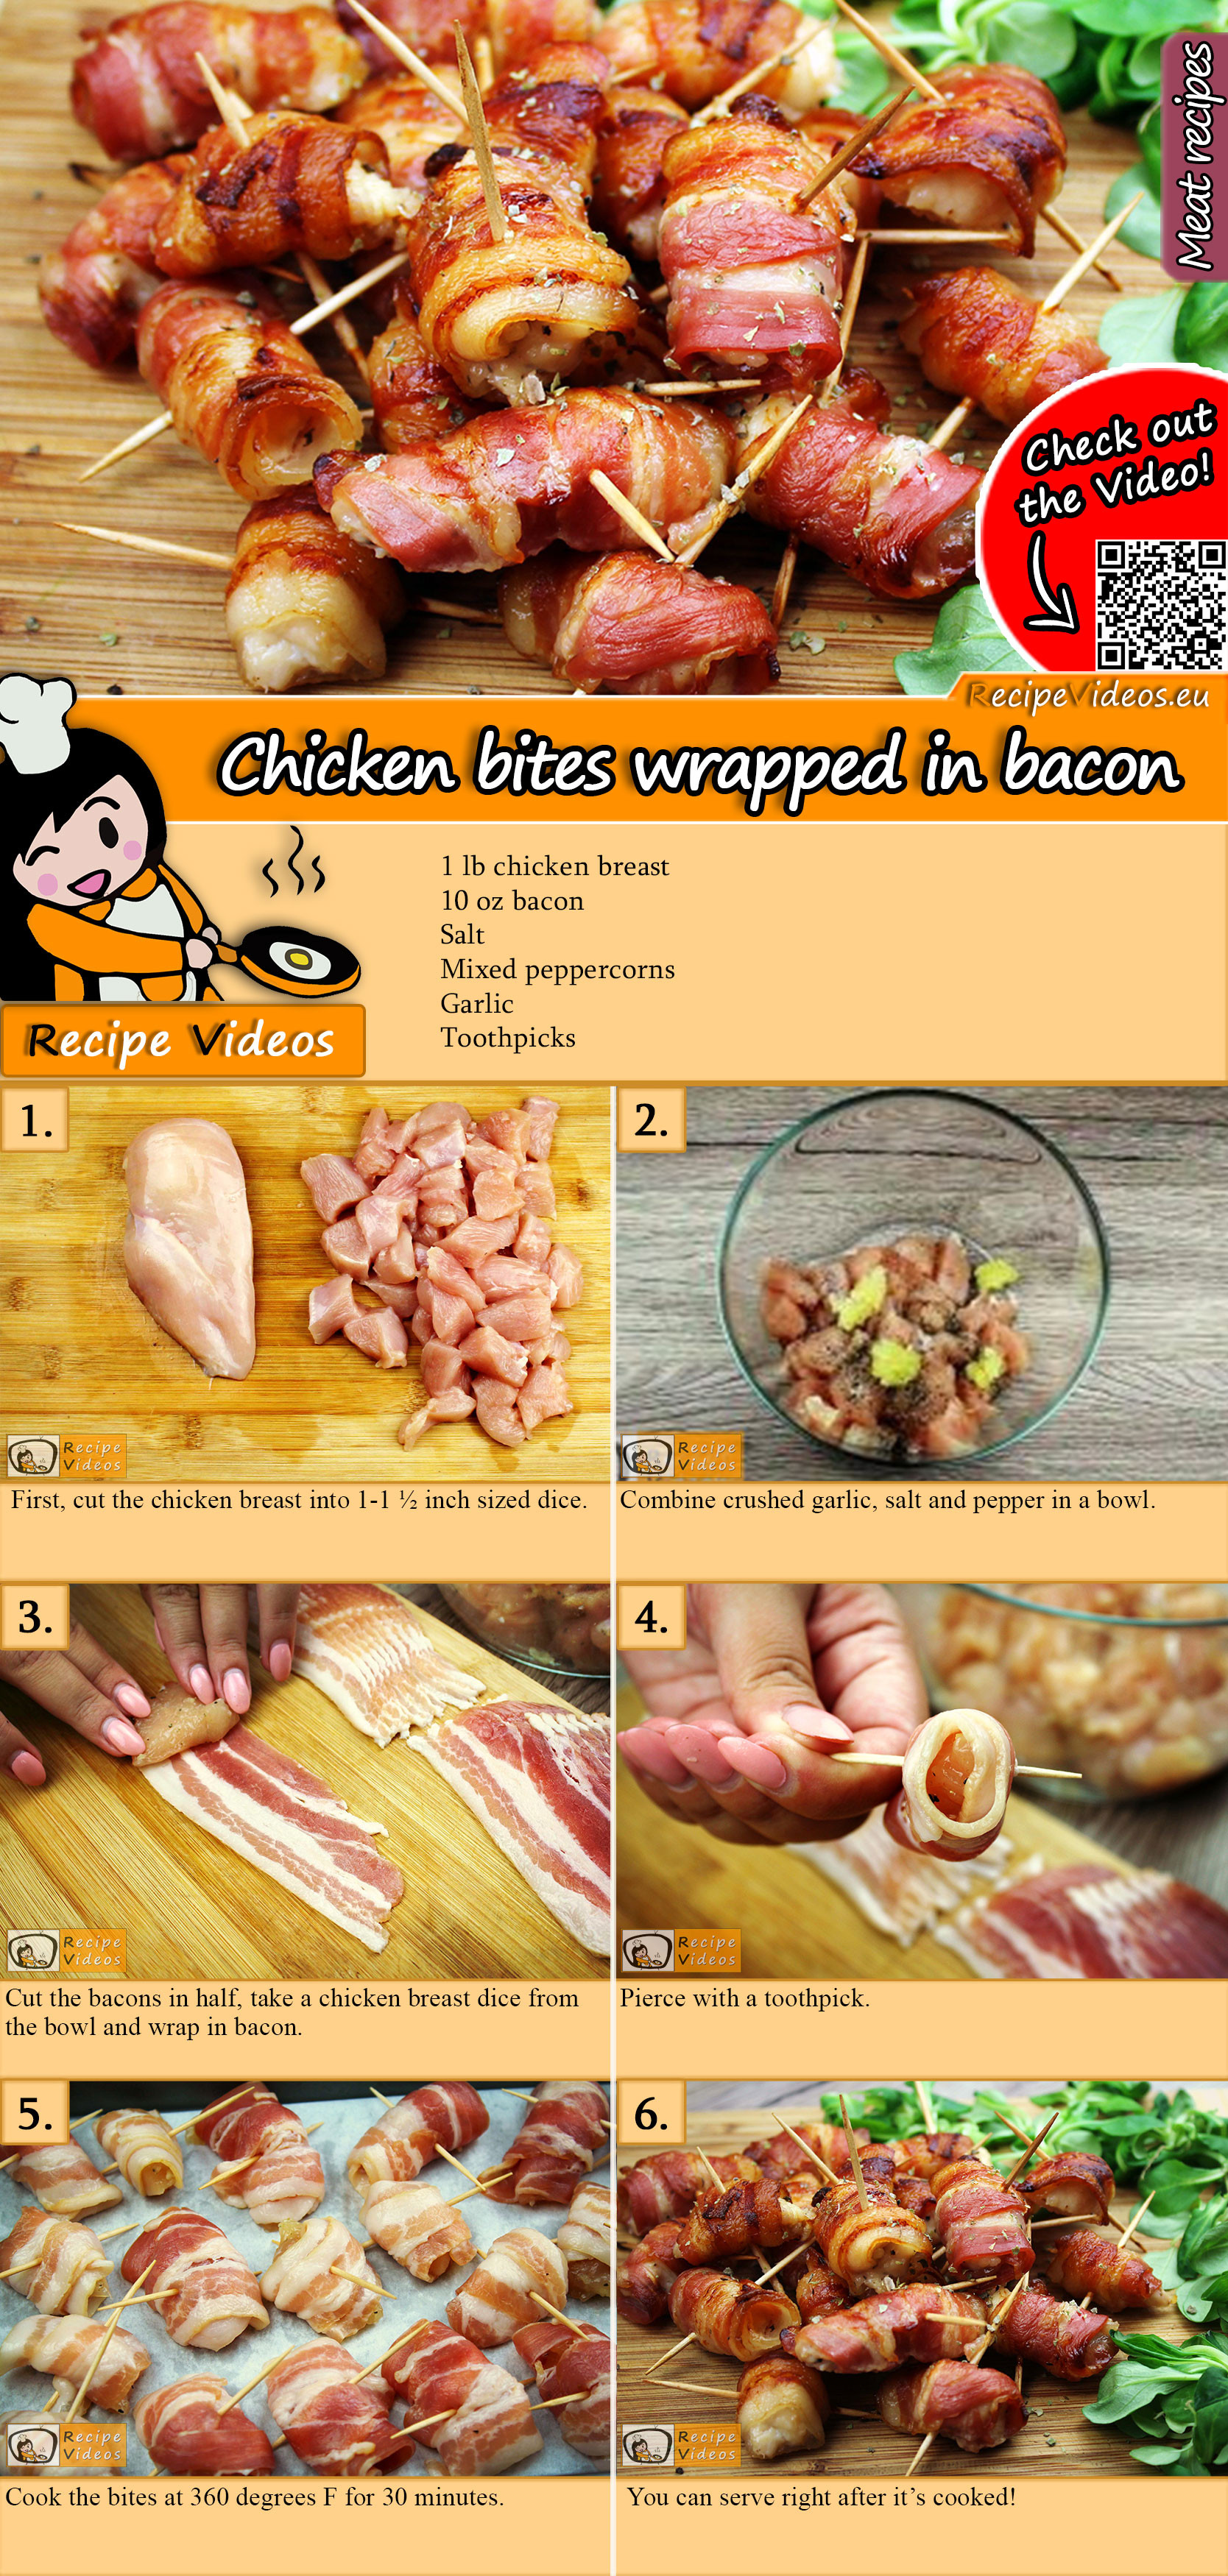 Chicken bites wrapped in bacon recipe with video